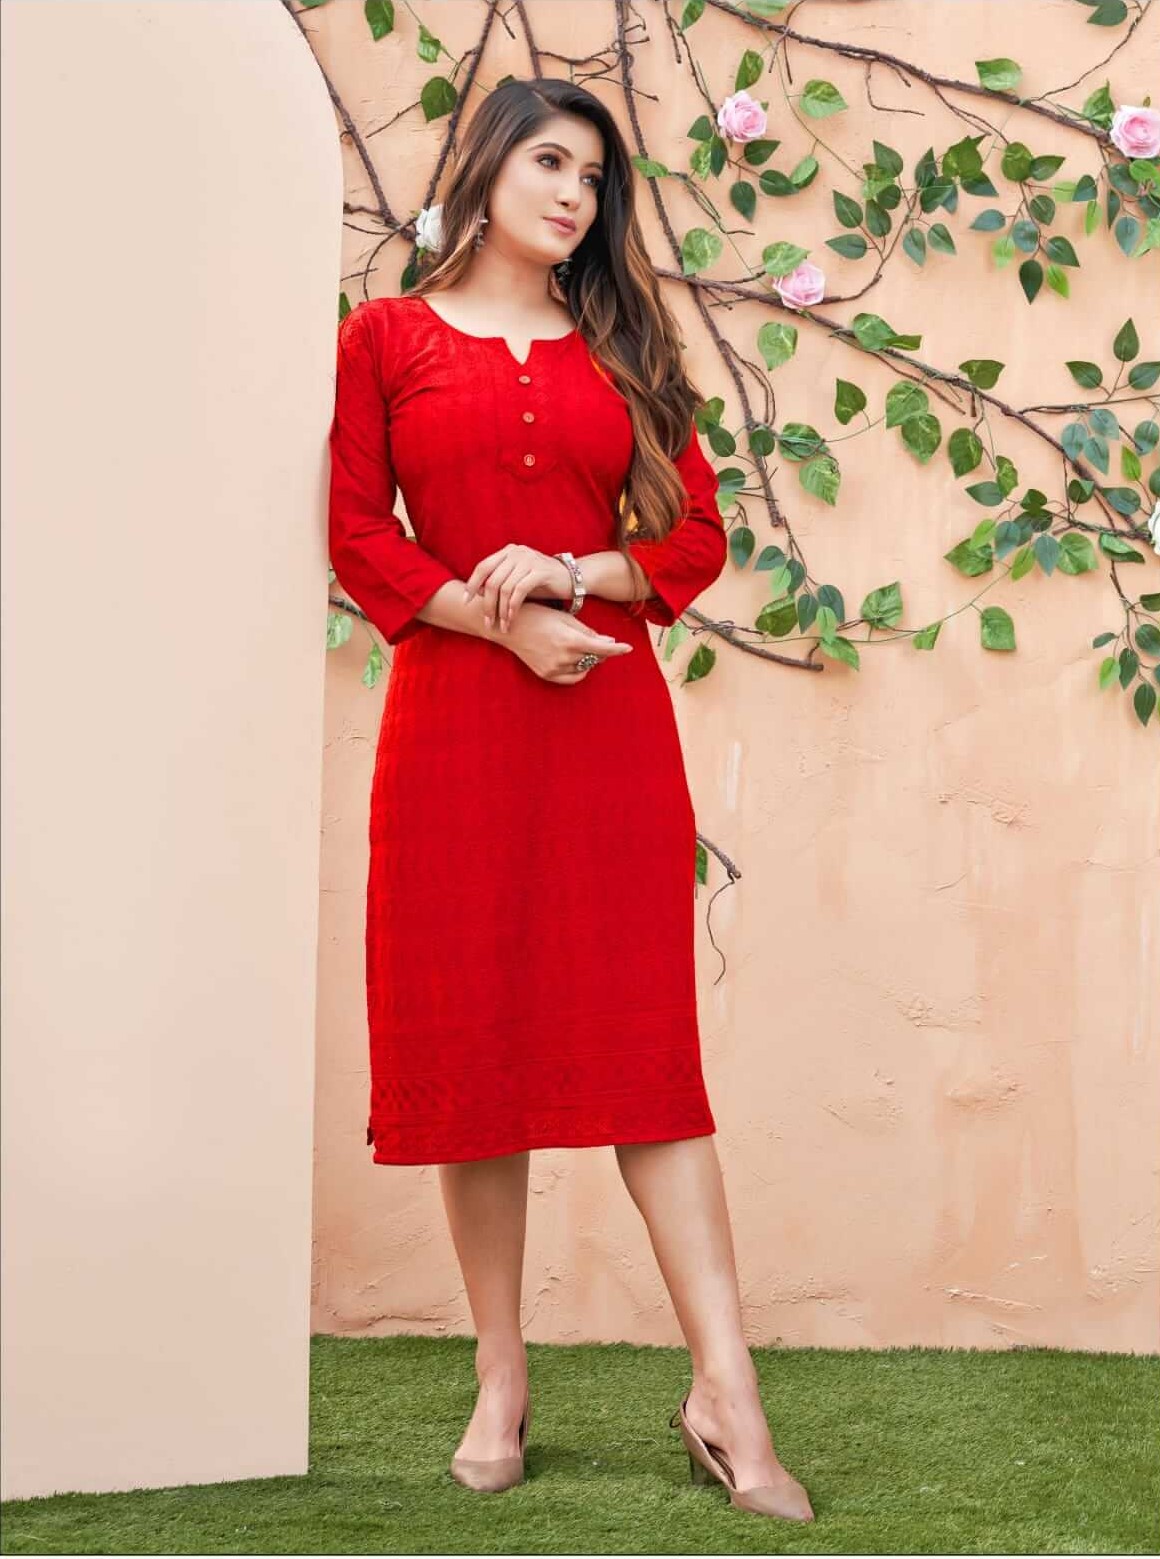 Catalogue - Gopi Chikan Collection in Balaganj, Lucknow - Justdial